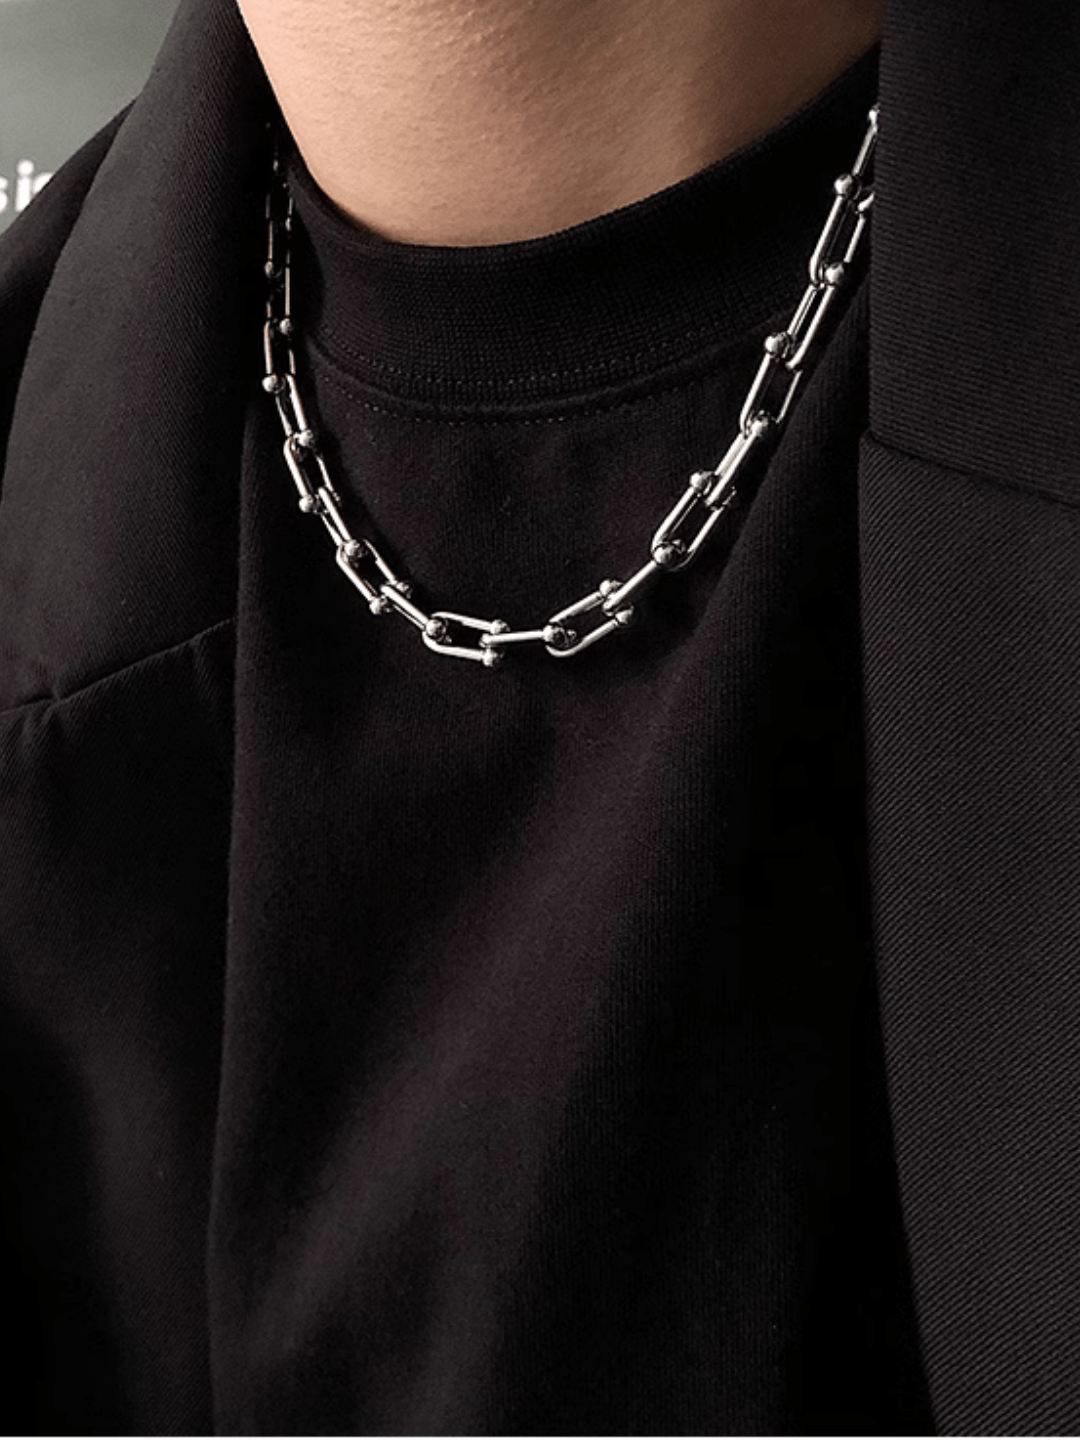 Korean style chain necklace na641